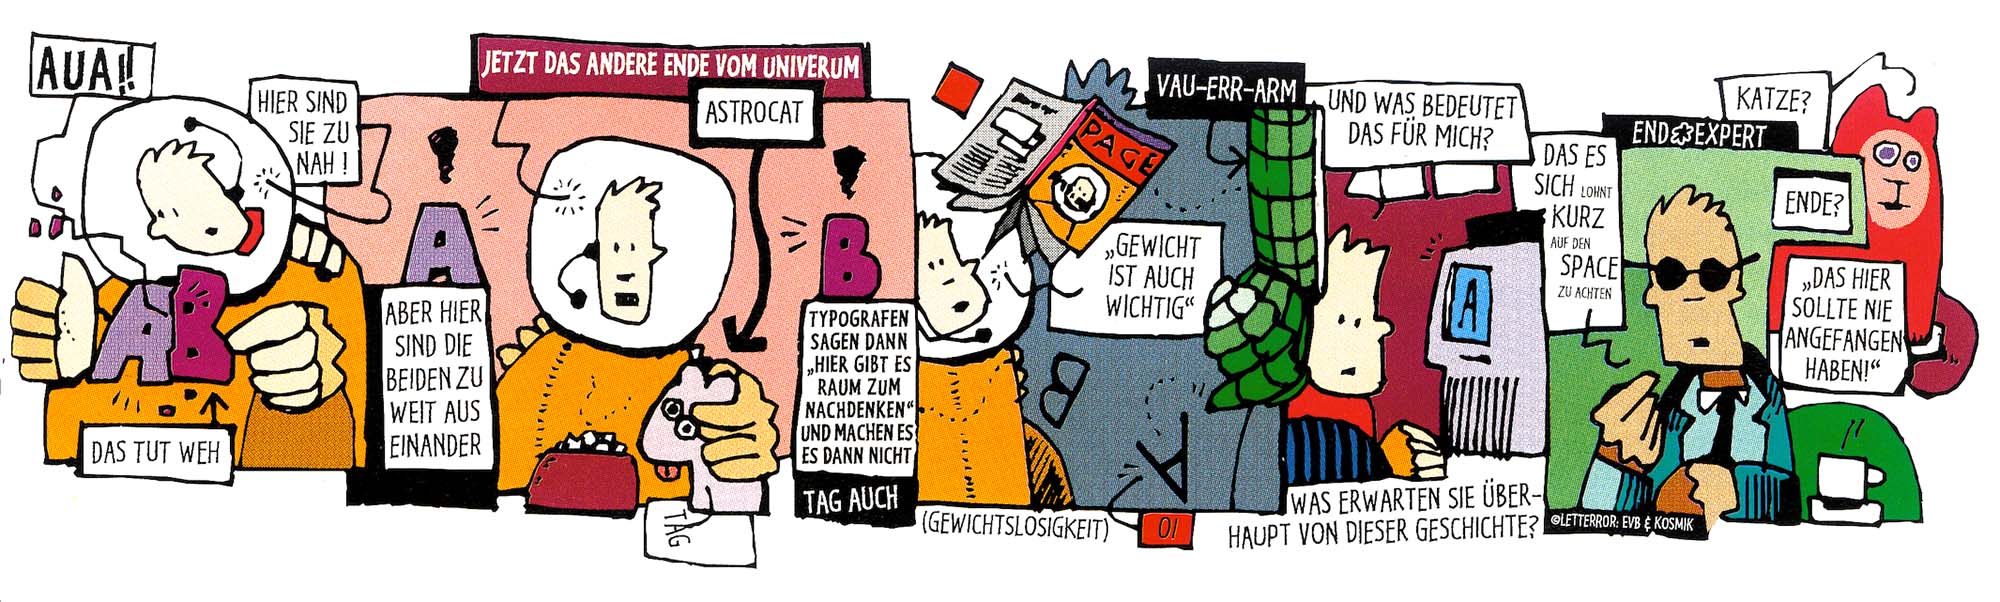 A cartoon in which Typoman explains spacing. Here Typoman speaks German, for some reason.